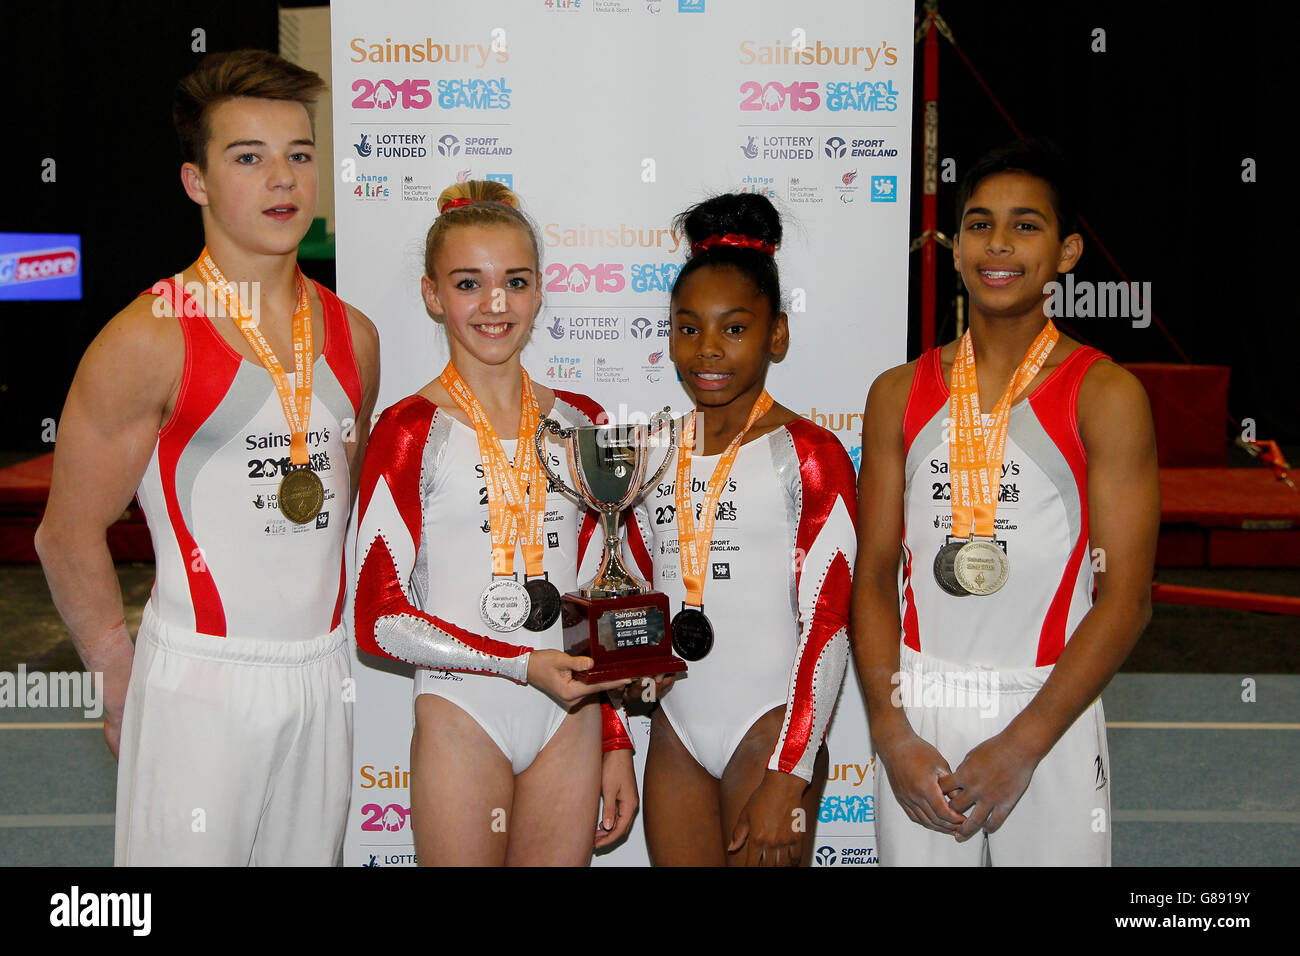 English gymnasts pose after the awards ceremony during the Sainsbury's 2015 School Games in Manchester. Stock Photo